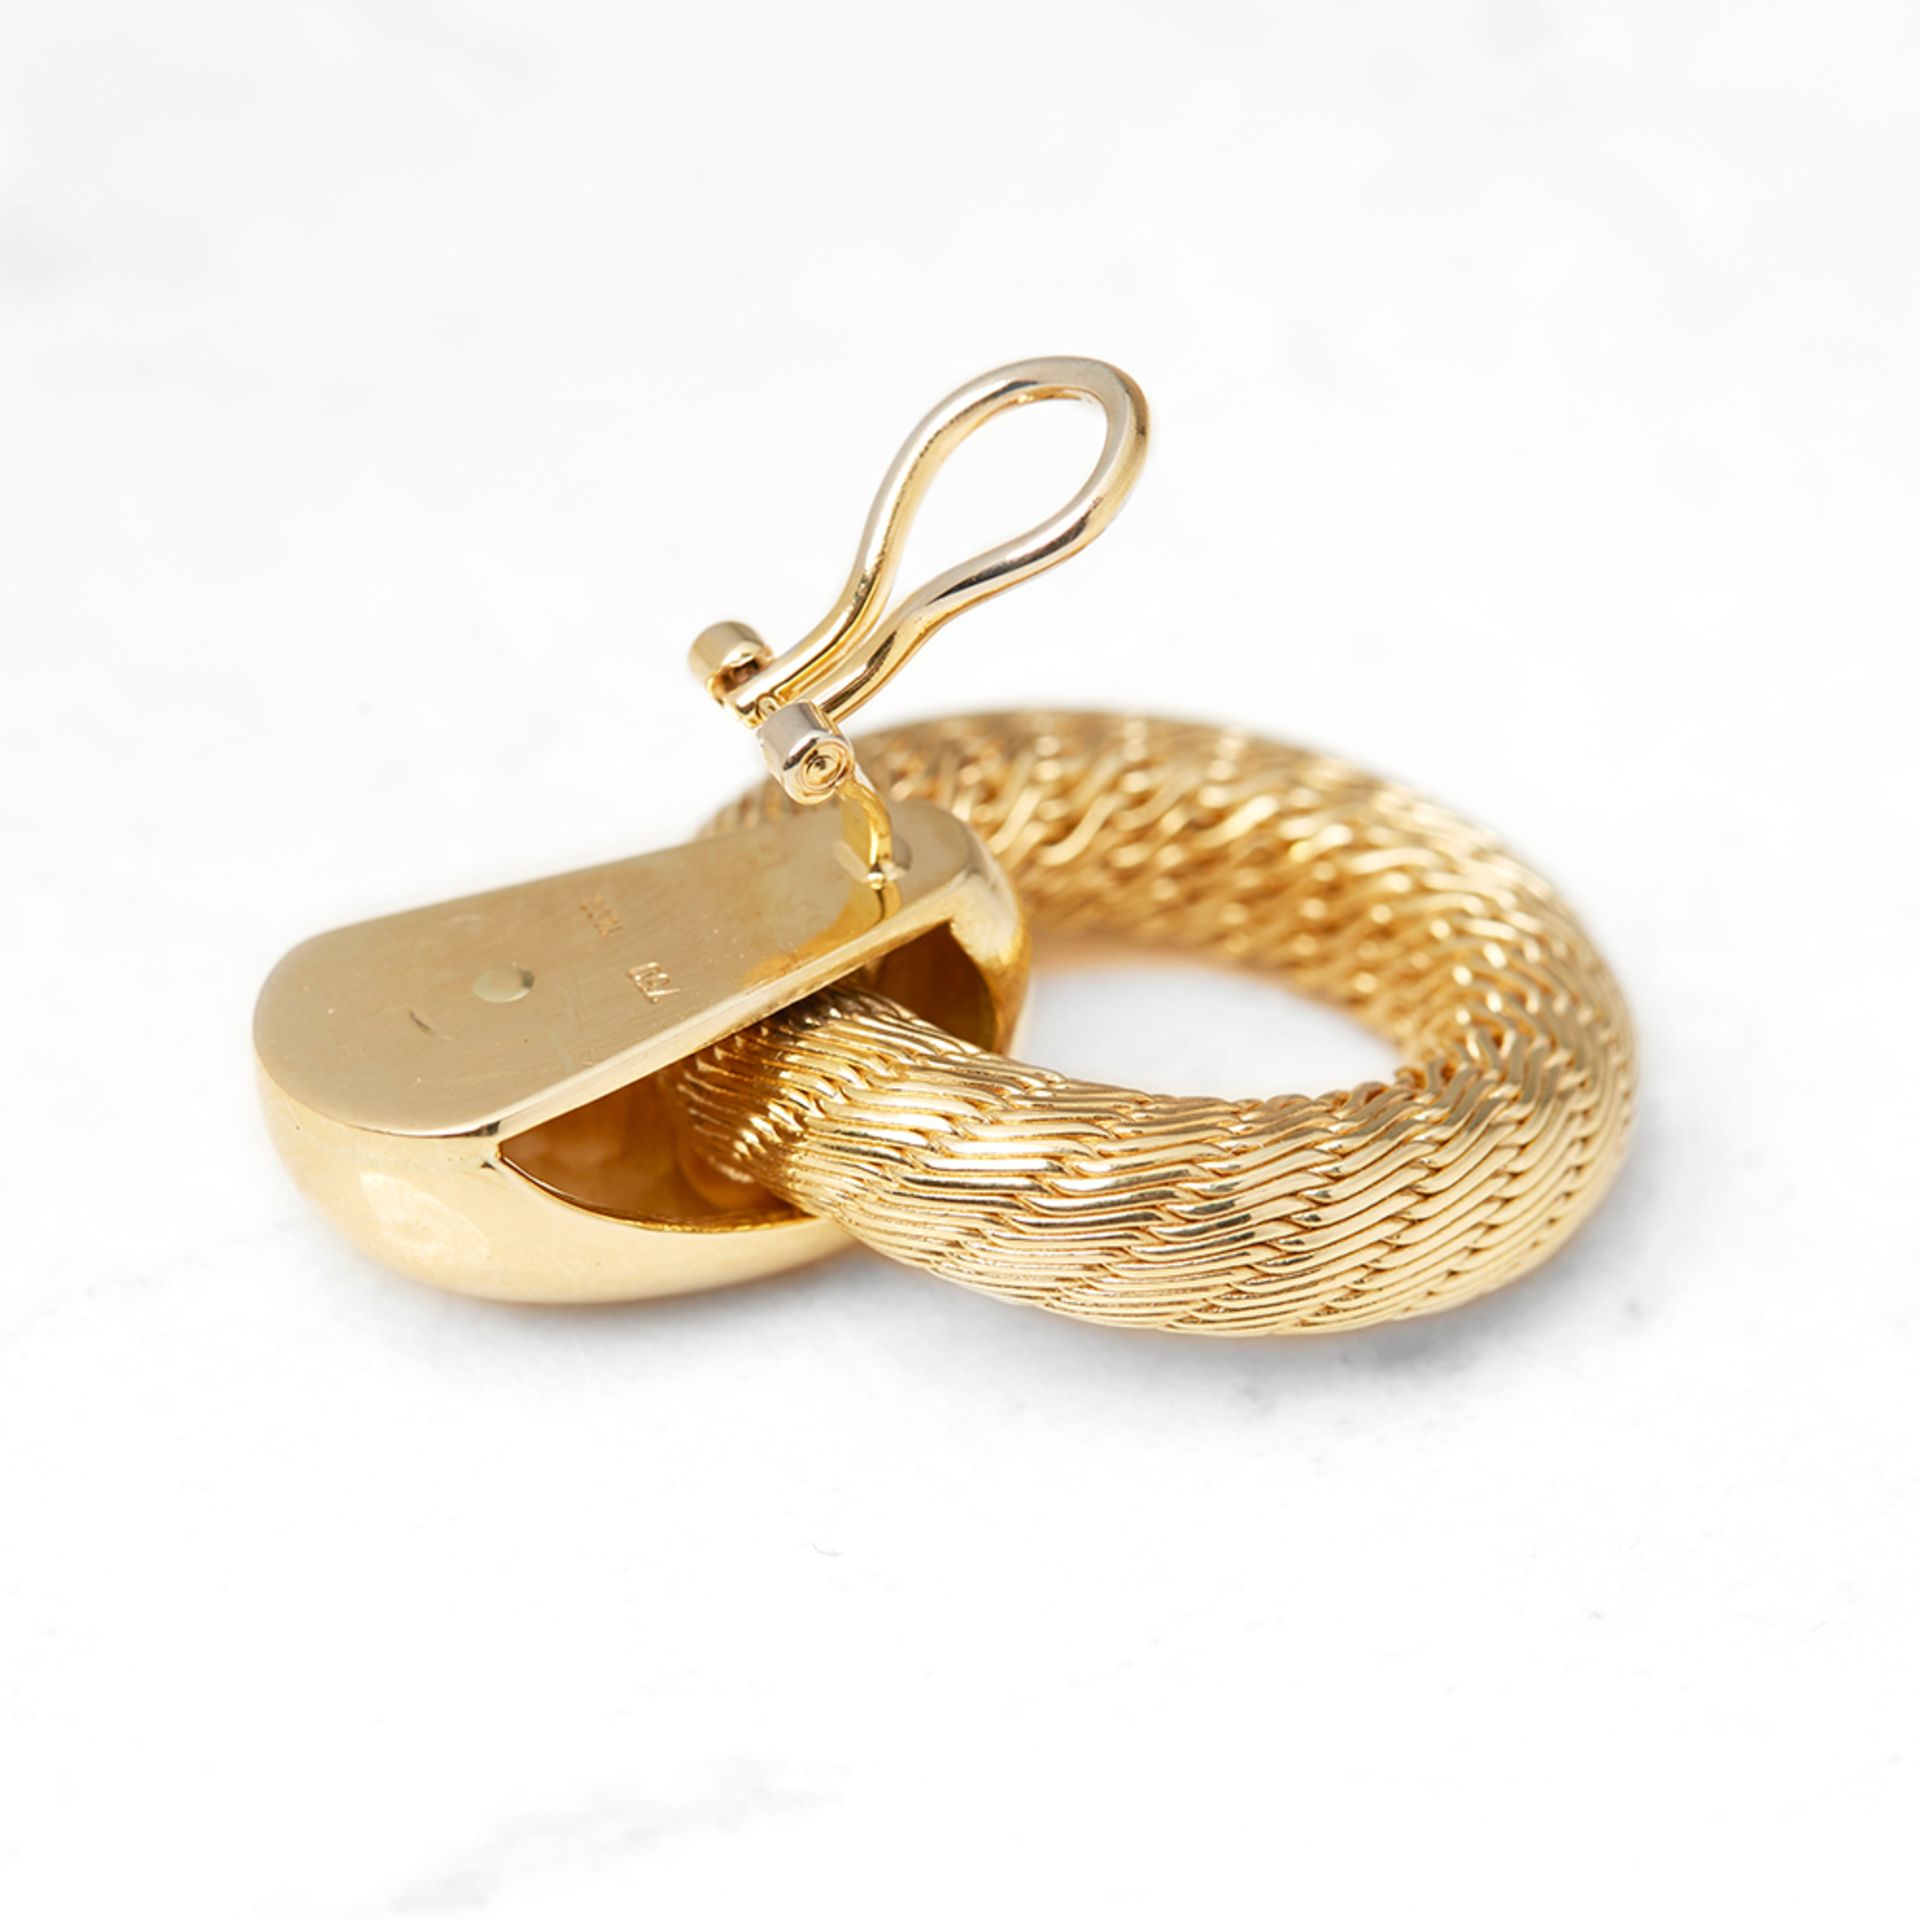 Tiffany & Co. 18k Yellow Gold Woven Hoop Ear Clips - Image 3 of 4